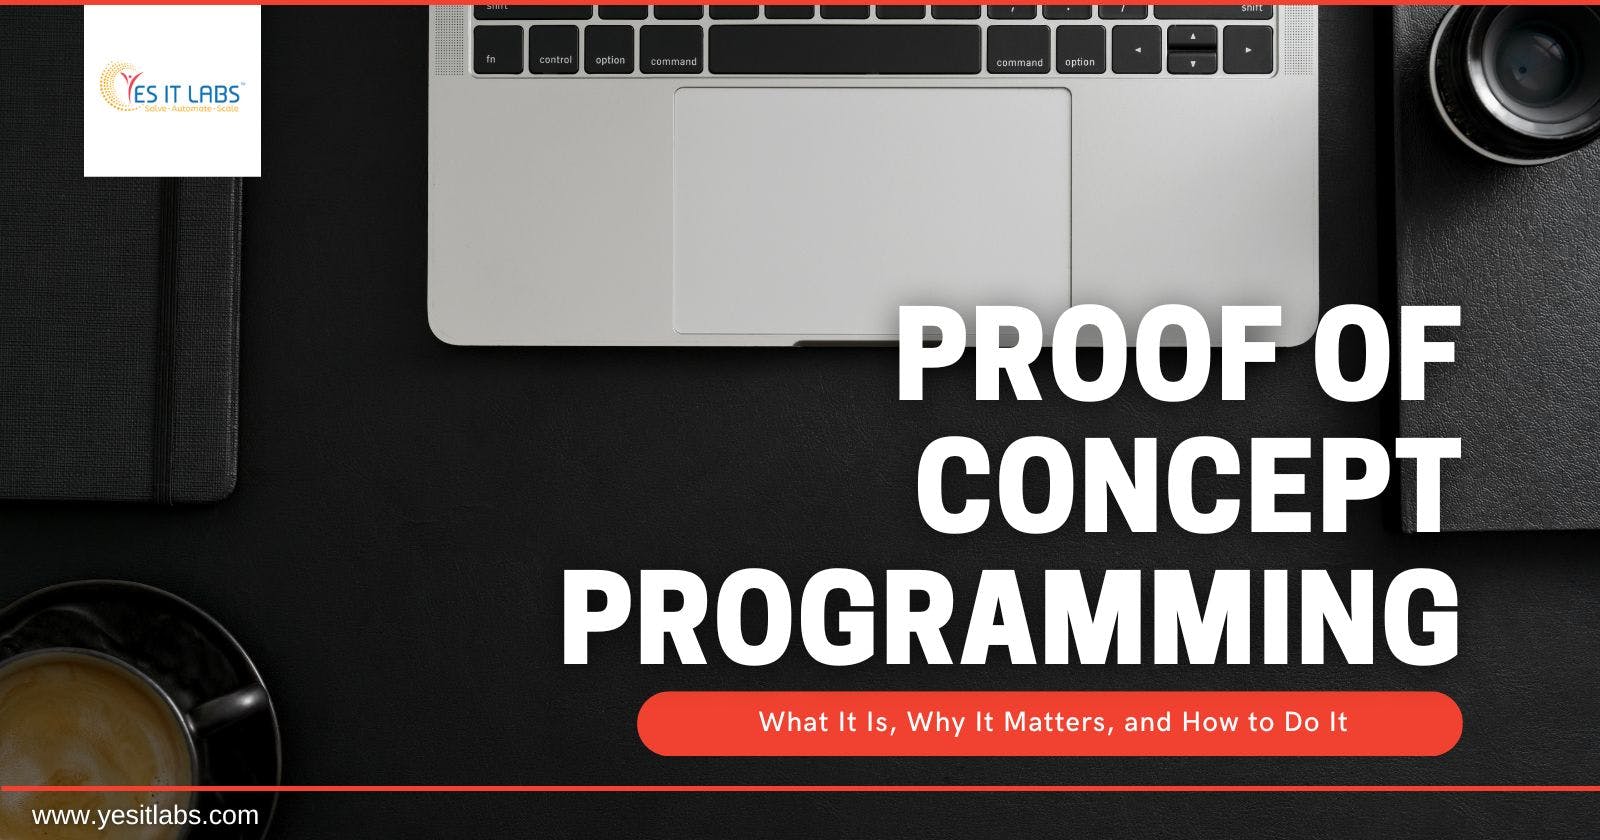 Proof of Concept Programming: What It Is, Why It Matters, and How to Do It